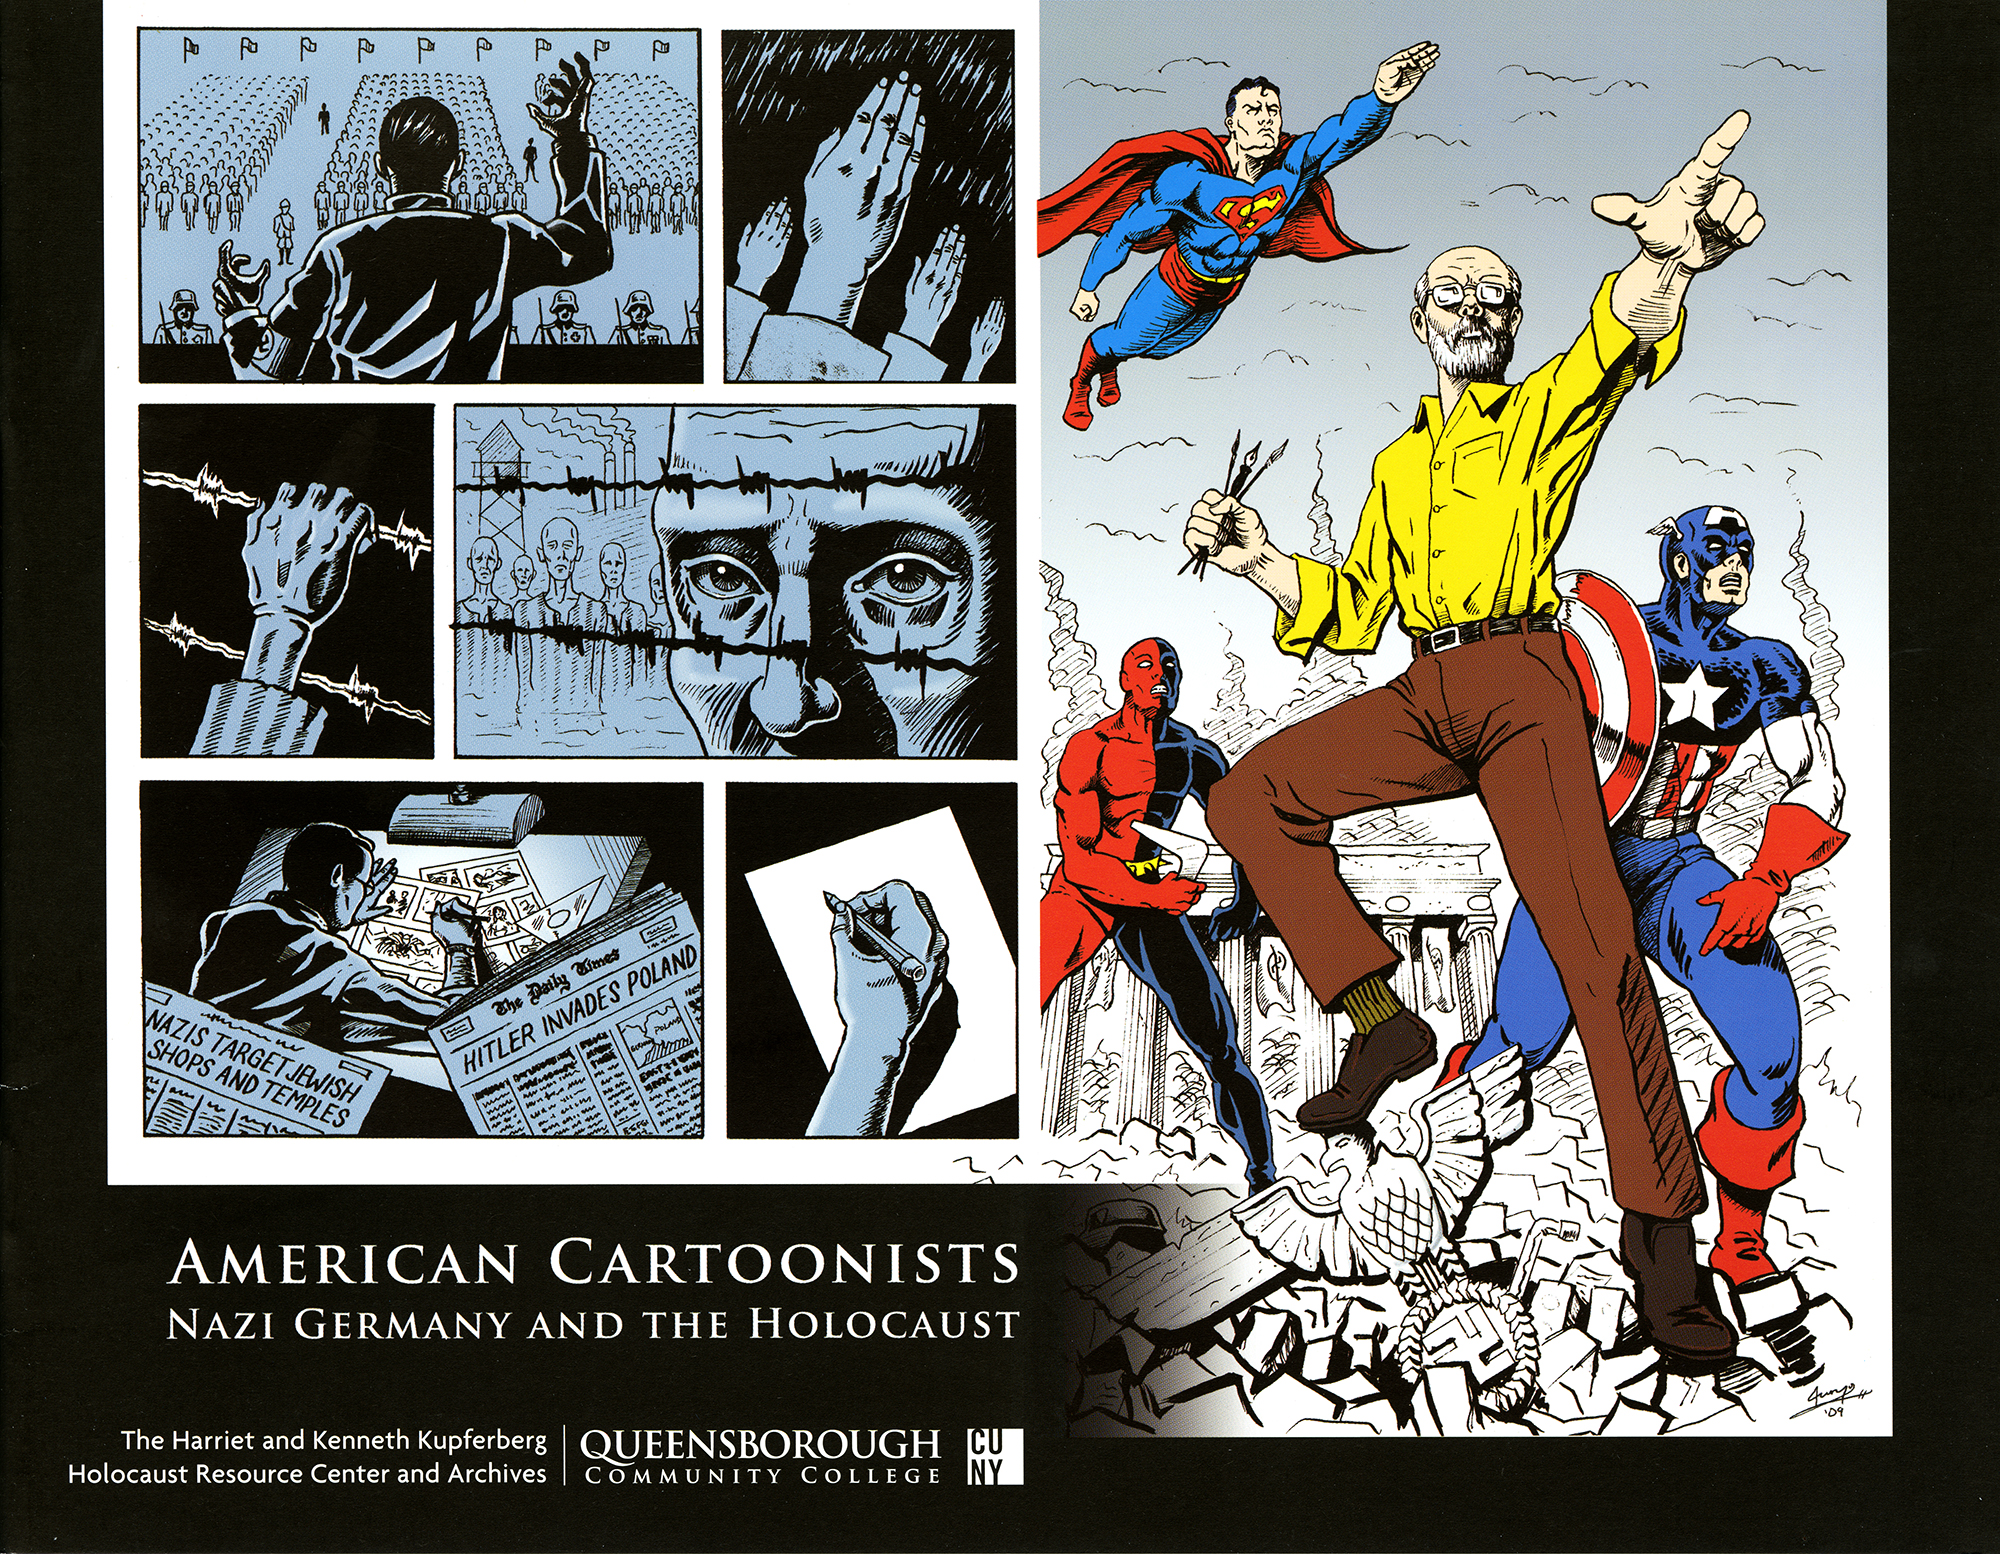 Cover image of the KHC's 'American Cartoonists: Nazi Germany and the Holocaust' exhibition catalog